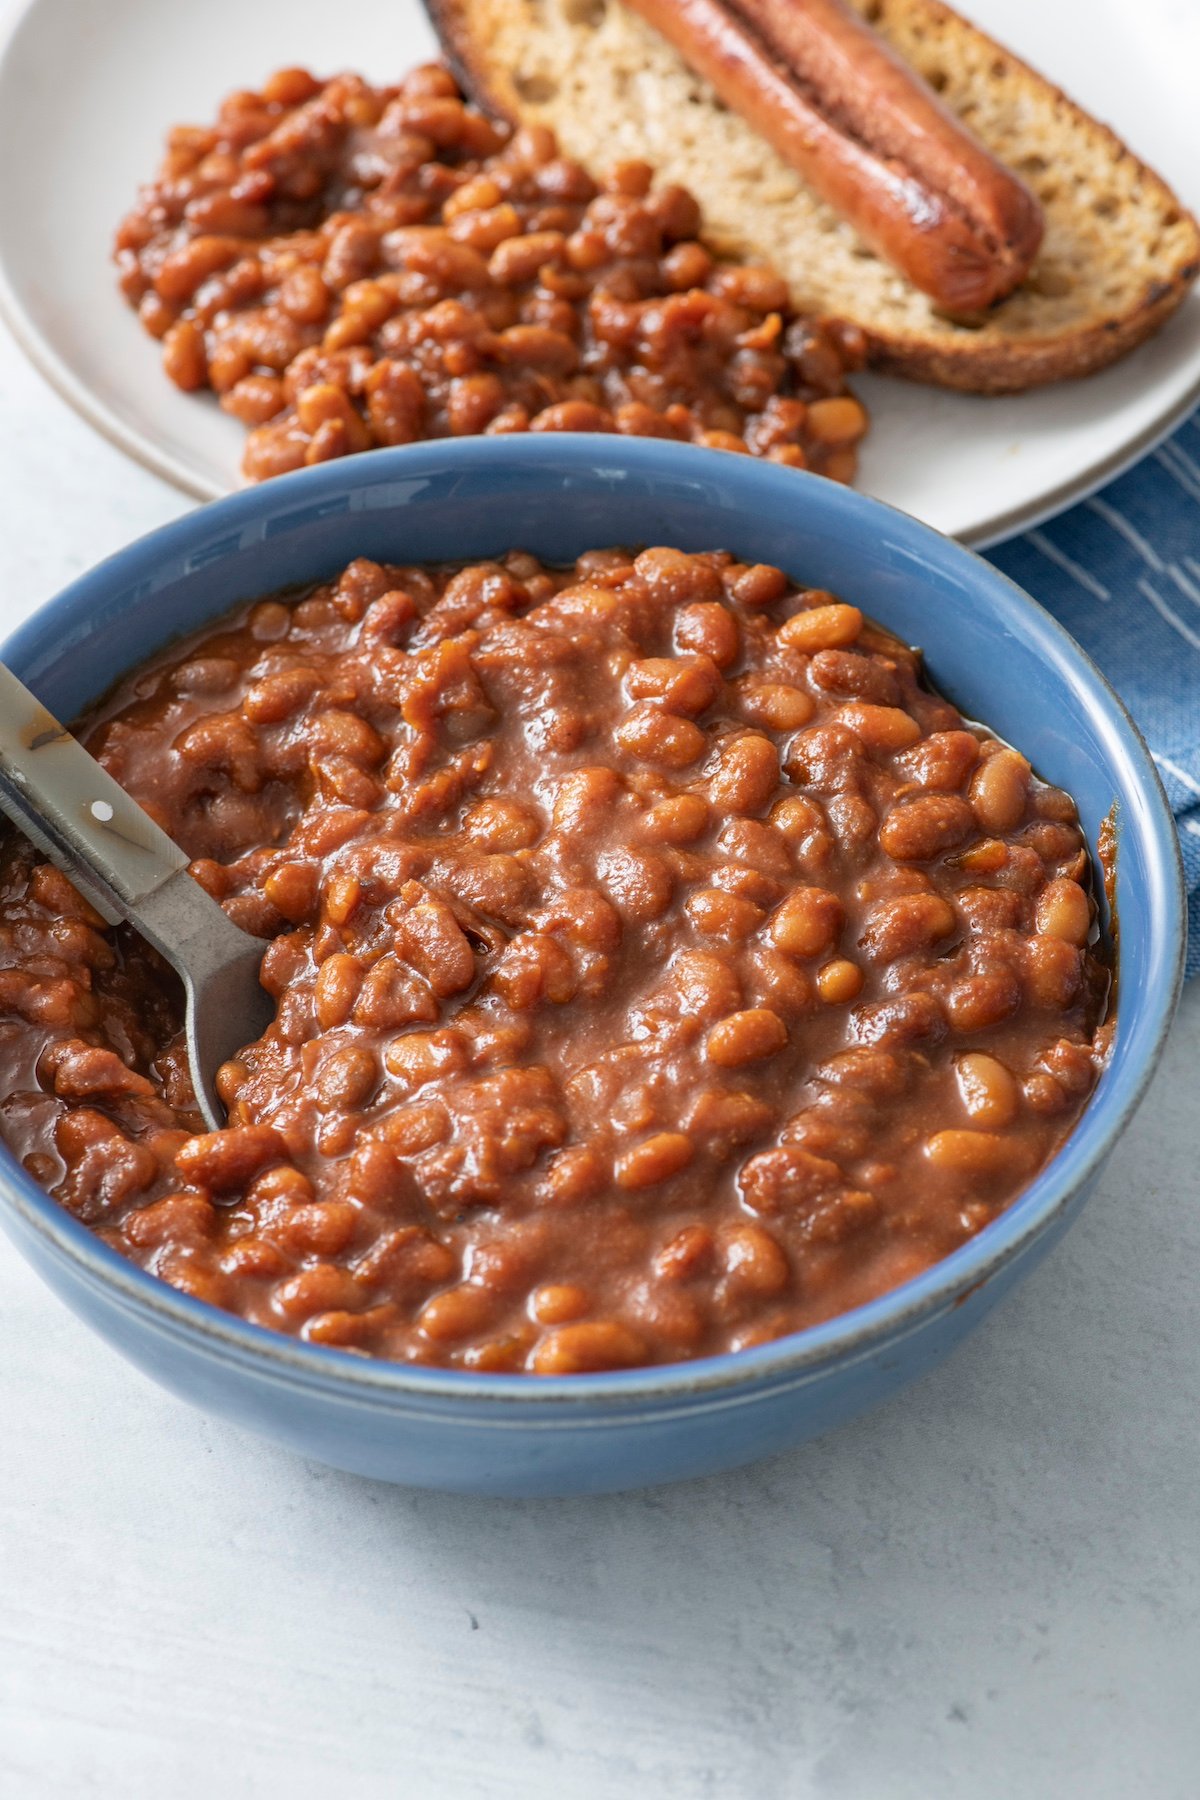 Baked beans in a blue bowl with a spoon.